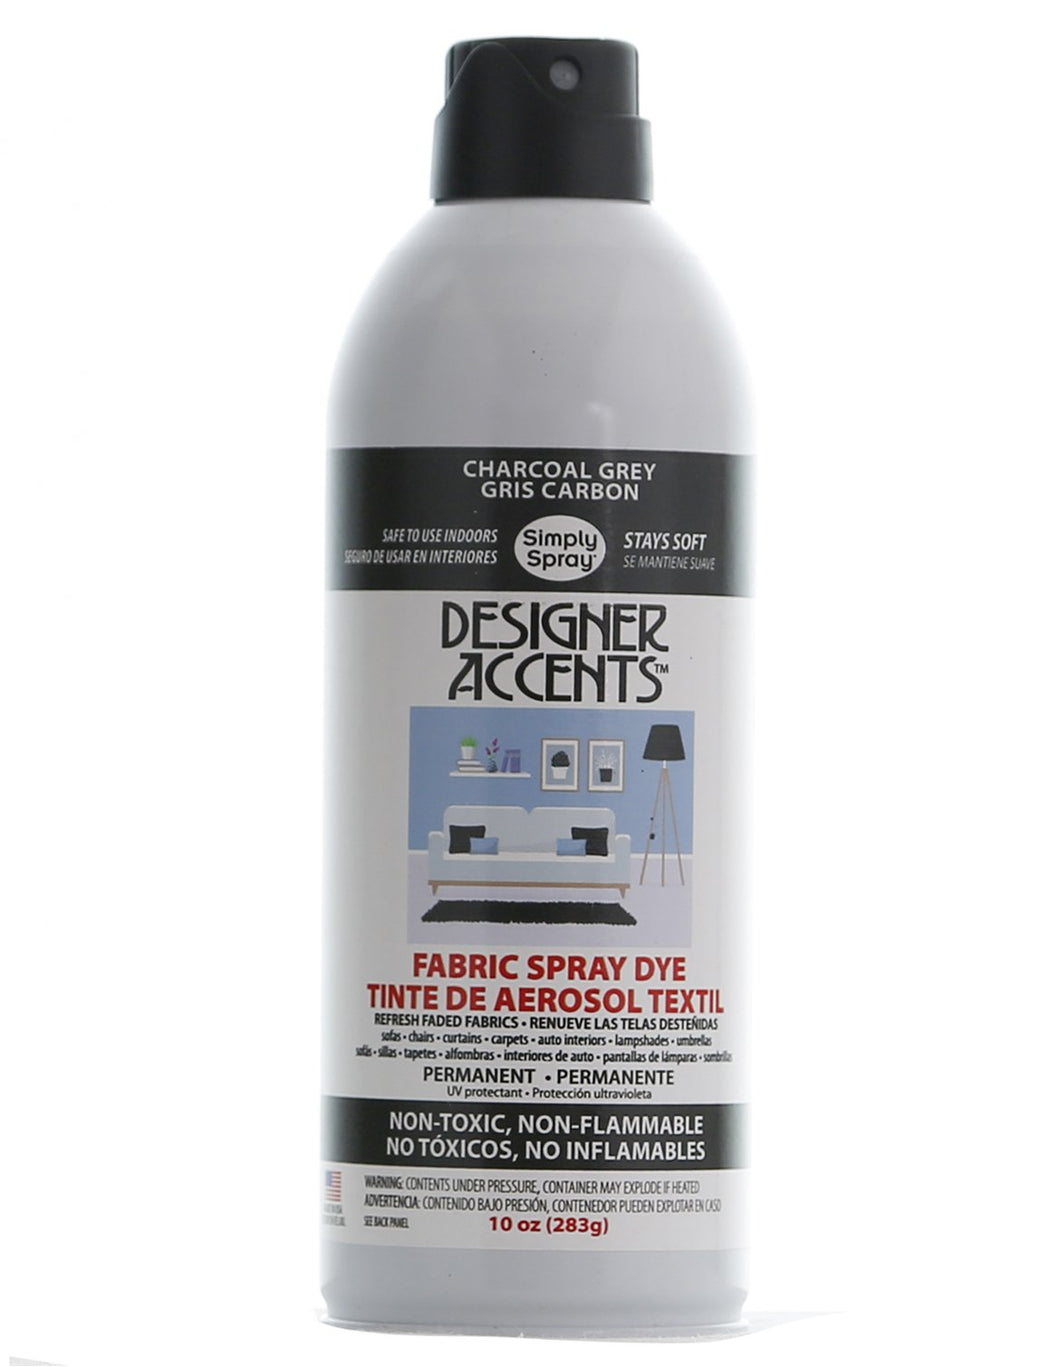  General Upholstery Web Spray Glue Contact Adhesive 12oz.  Temporary or Permanent Bonding for Fabric, Foam, Acoustic Panels, Crafting,  & Automotive Seats/Inserts. Bonds to Foam, Fabric, Metal, & Wood : Arts,  Crafts